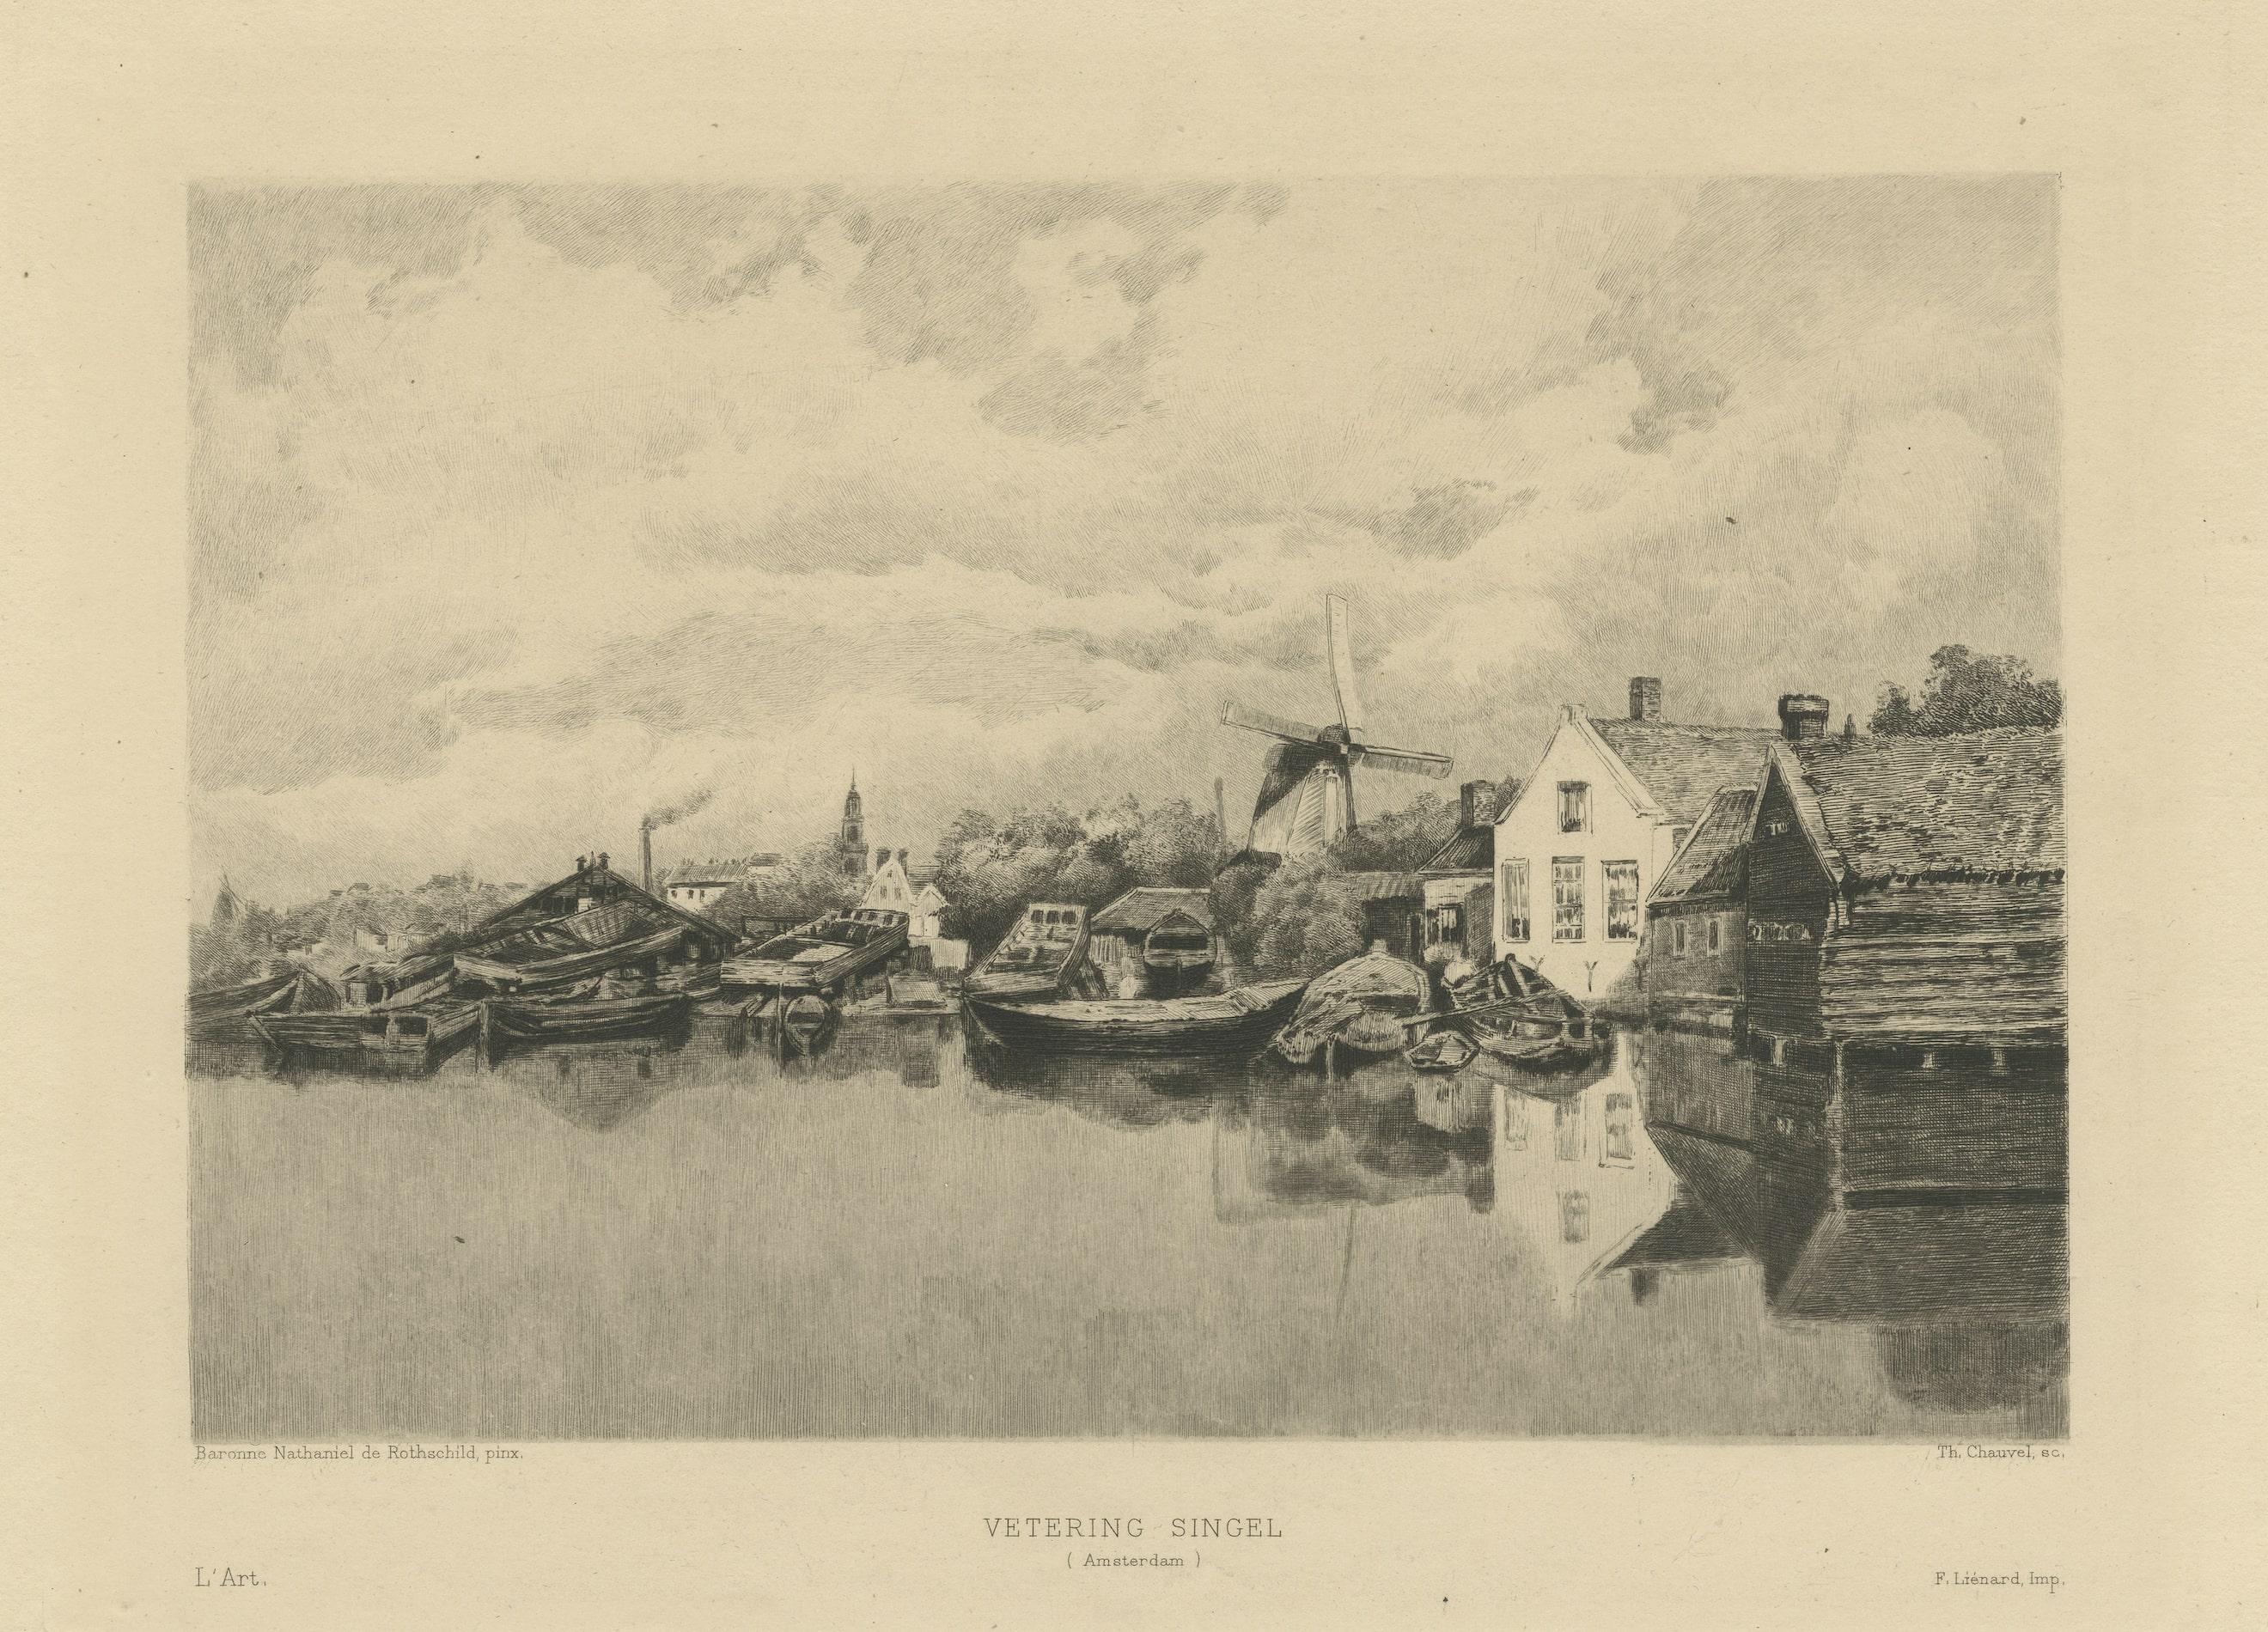 Antique print titled 'Vetering Singel (Amsterdam)'. View of a canal in Amsterdam, the Netherlands. Shows several houses, boats and a windmill. Engraved by Th. Chauvel after a painting by Baronne Nathaniel de Rothschild. Published circa 1875.